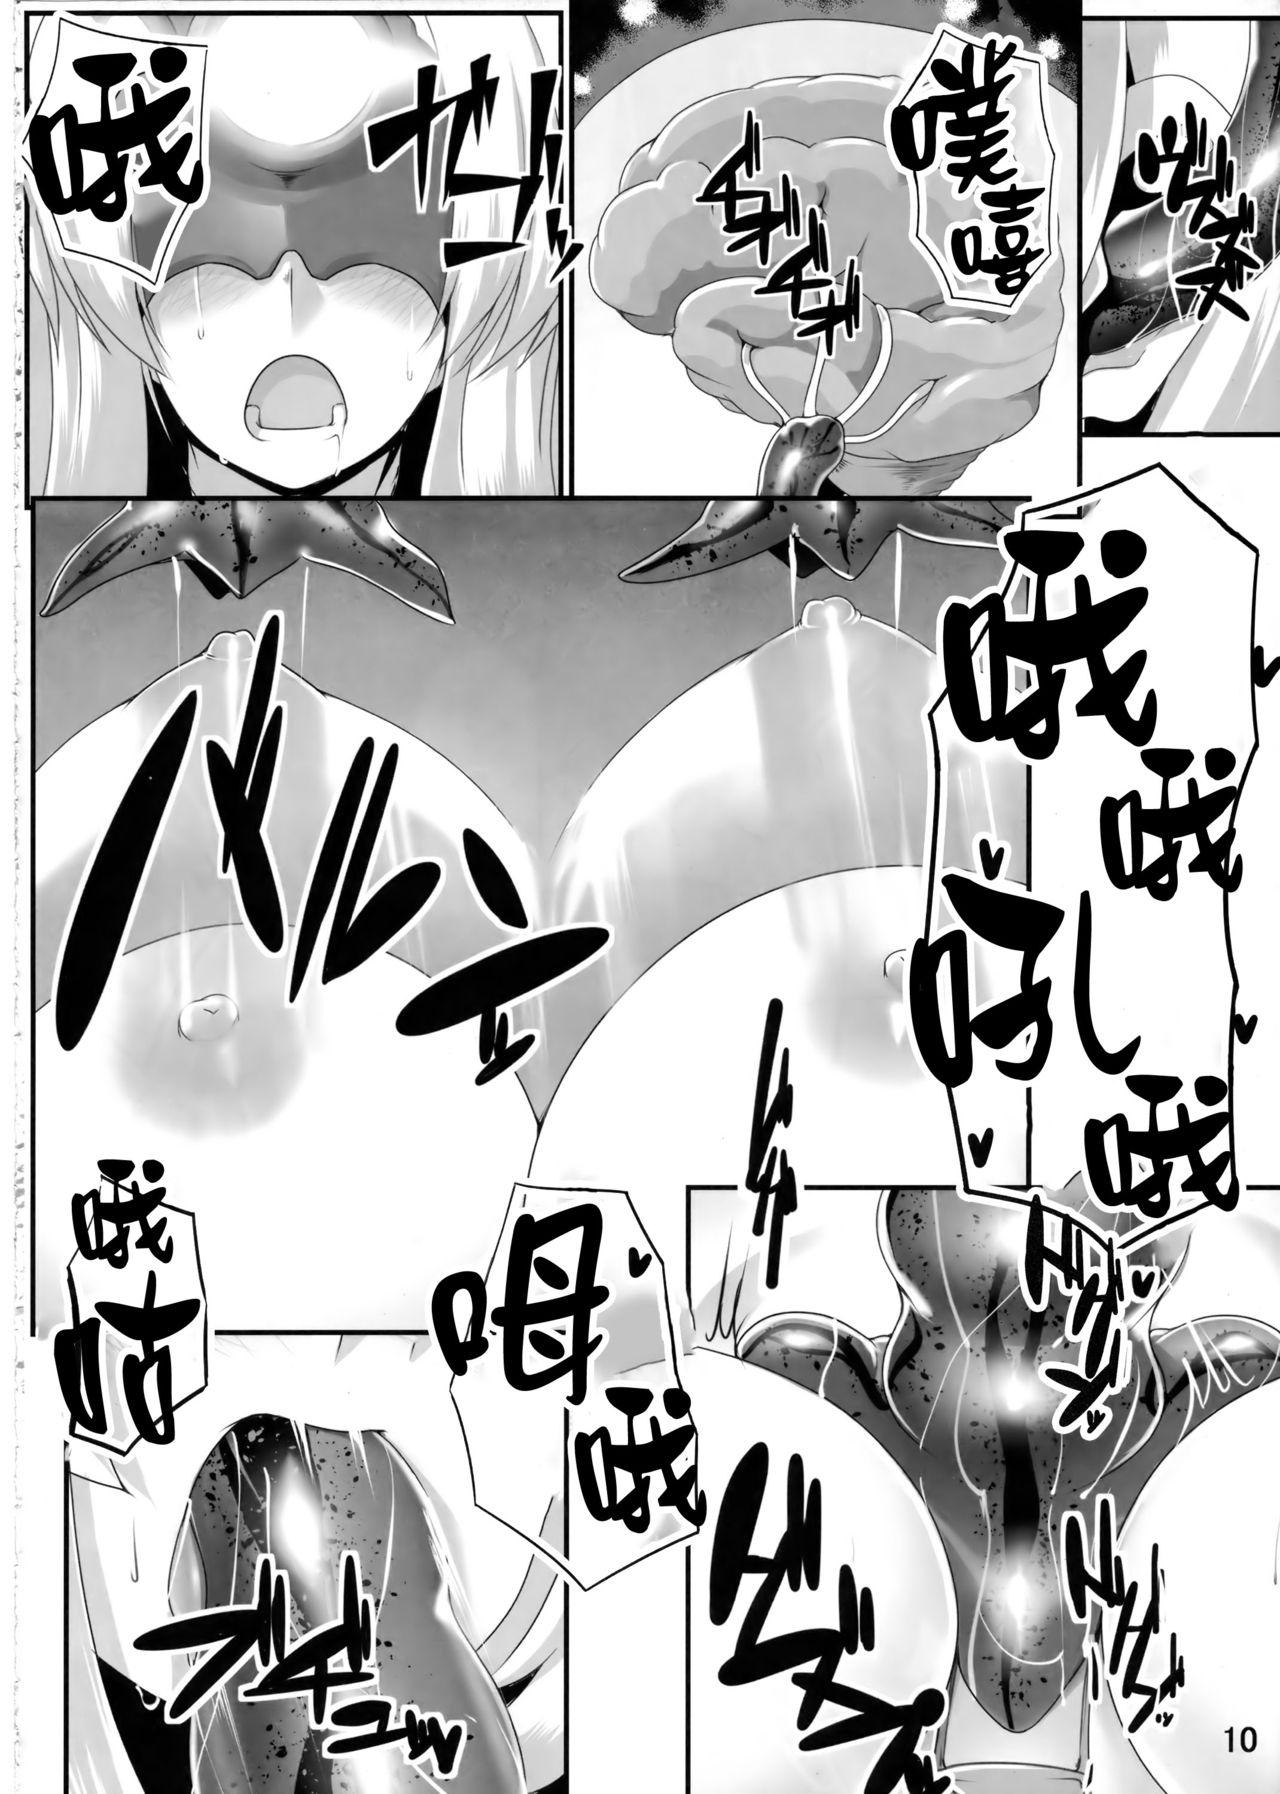 Blowing Shipping Records - Kantai collection Flexible - Page 11